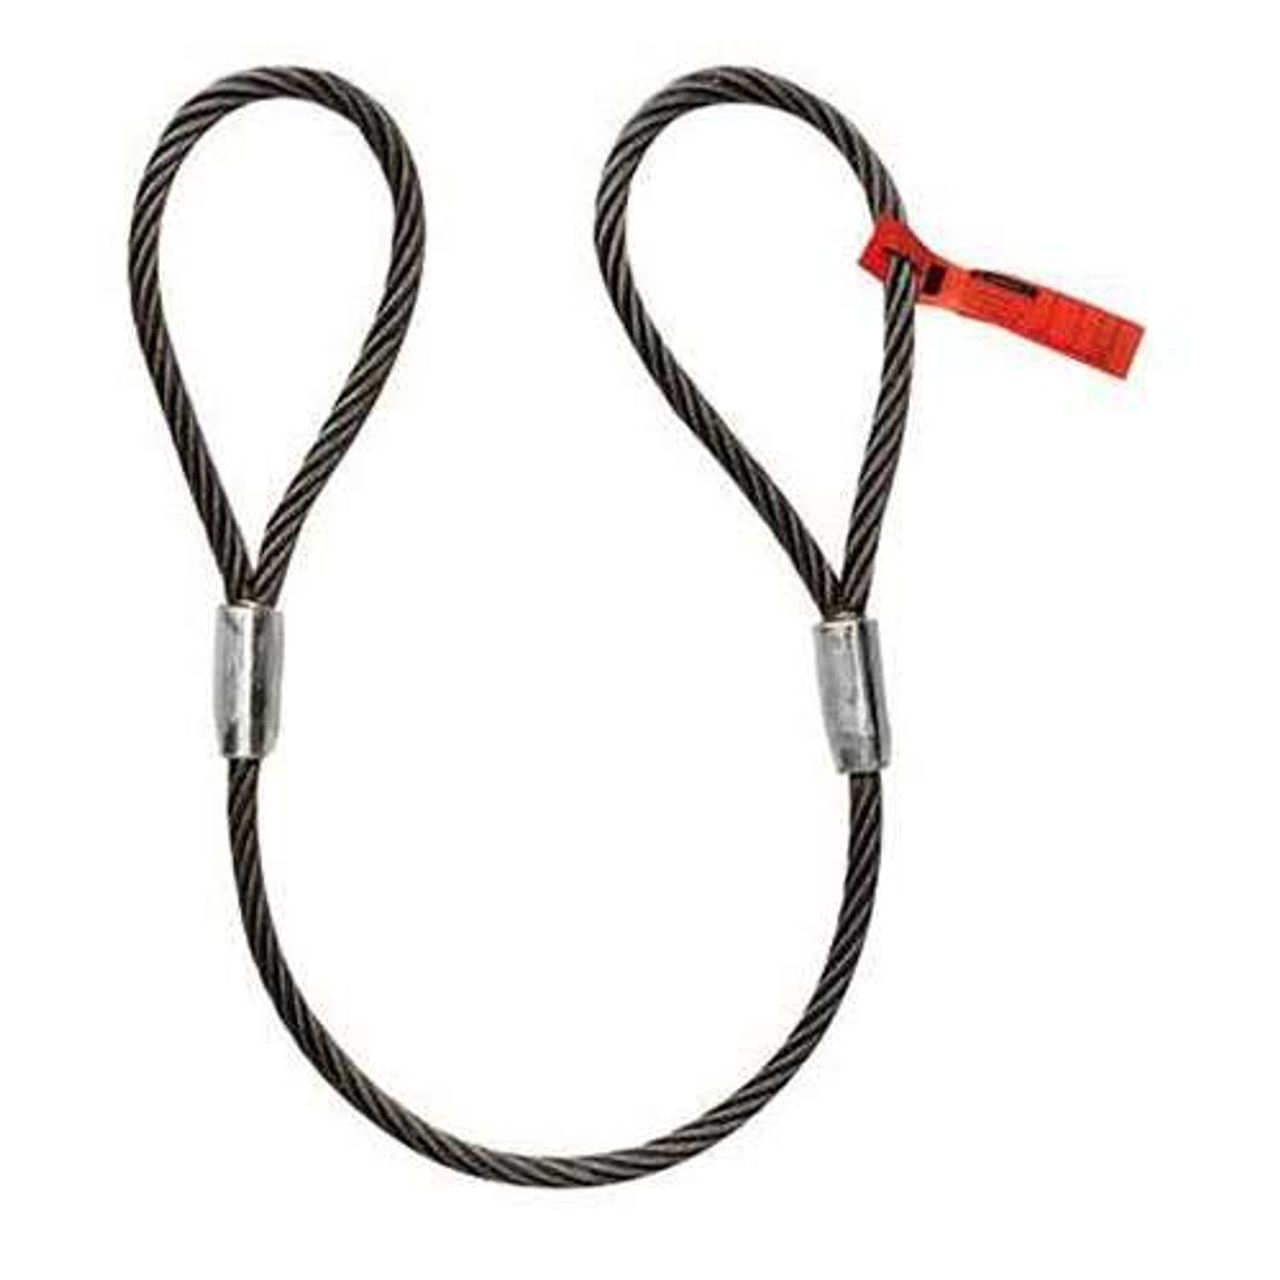 1 X 12' 6X19 EYE & EYE WIRE ROPE SLING W/ TAG & RFID - Bairstow Lifting  Products